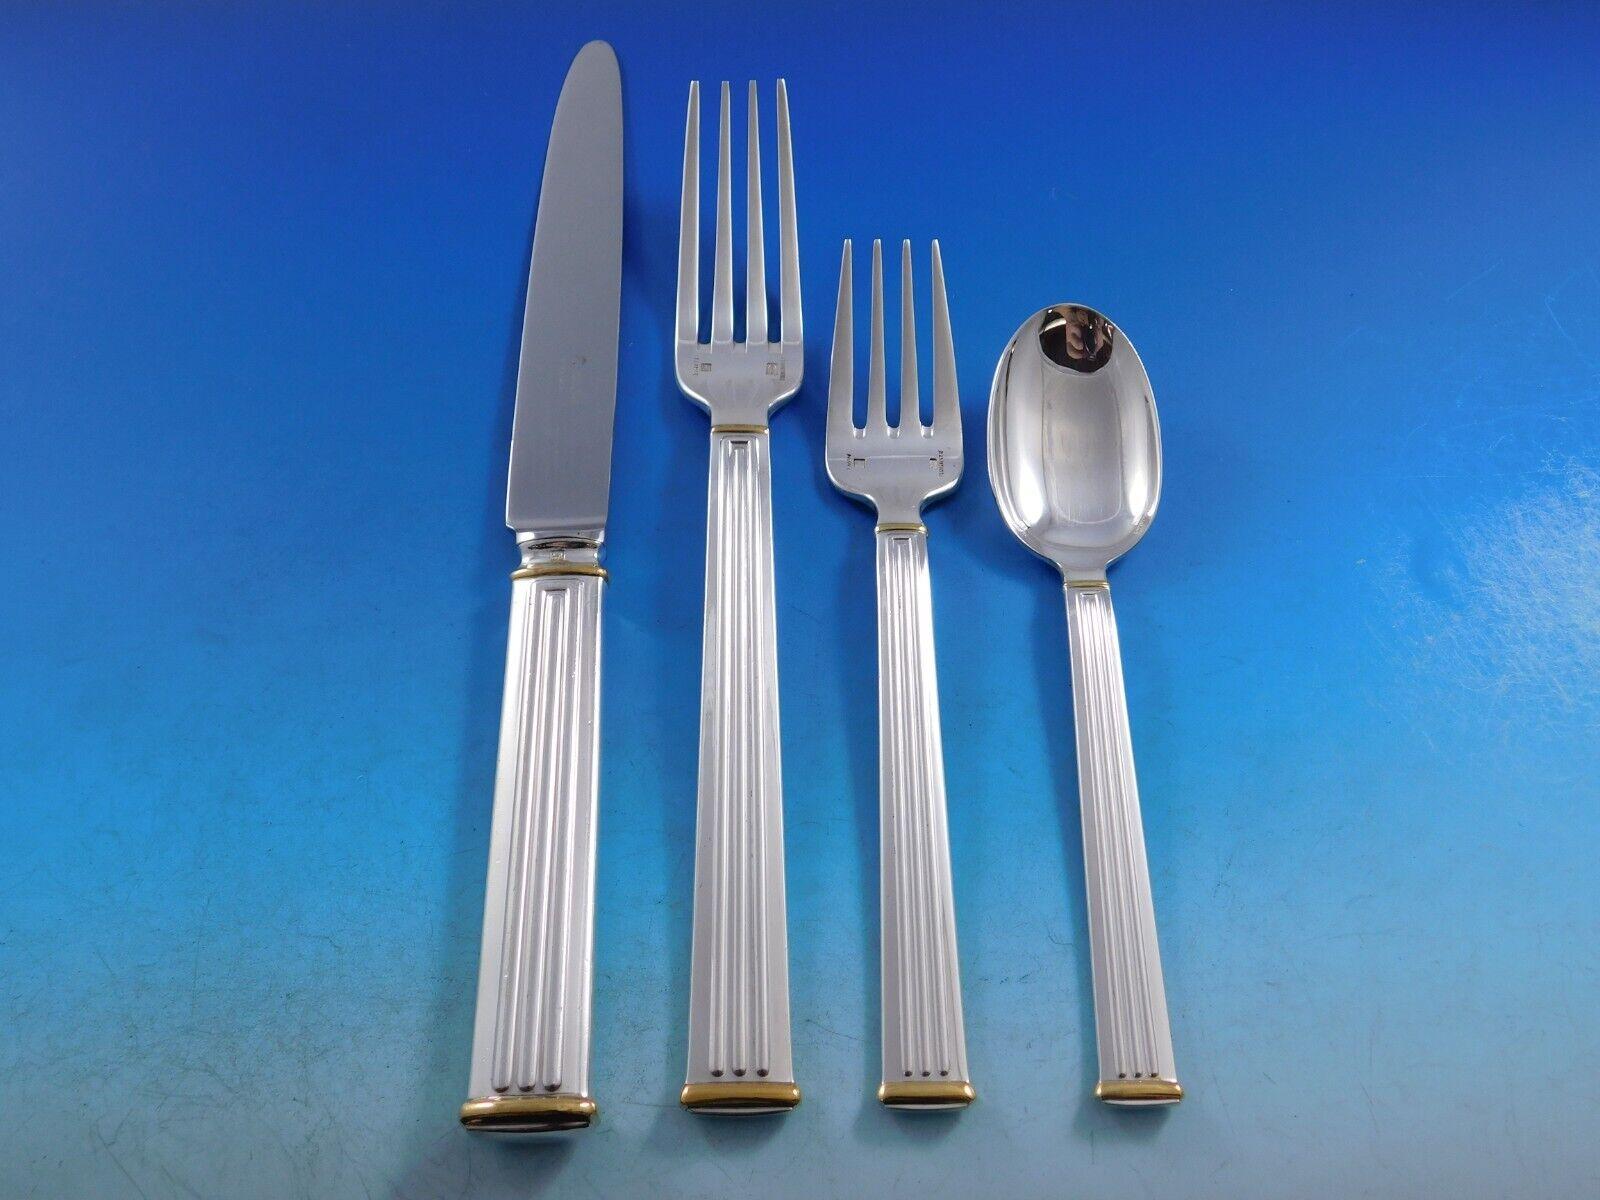 Modern clean lines in a Classic column motif makes this pattern, Triade, forever timeless. 

Dinner Size Triade Gold Accent by Christofle France Silverplated Flatware set - 66 pieces. This set includes:

8 Dinner Knives, 9 3/4